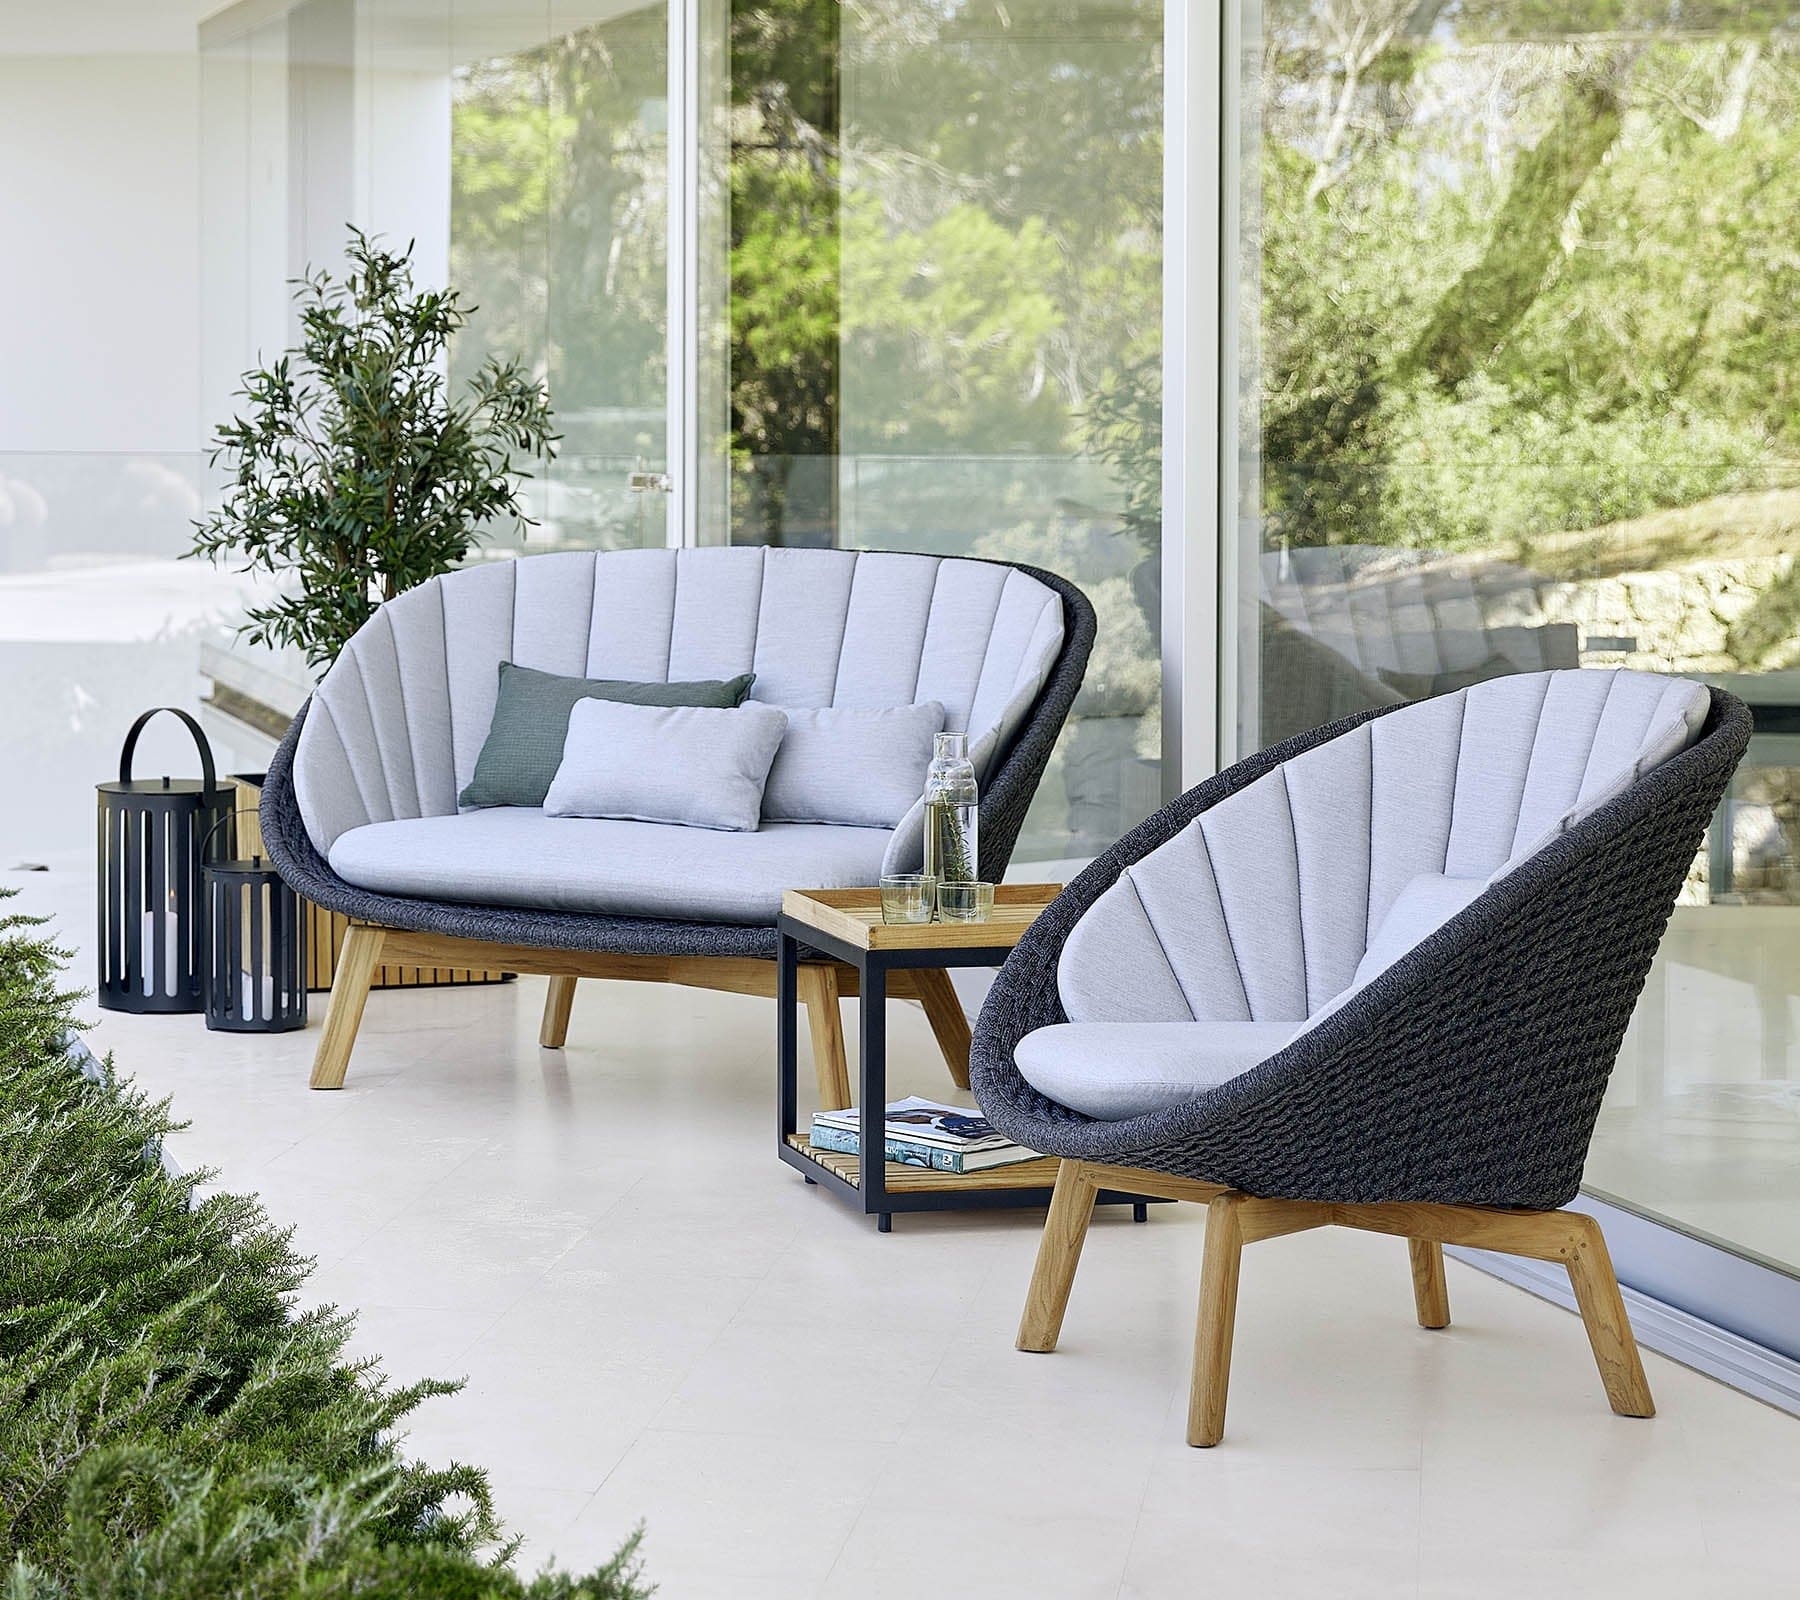  Boxhill's Peacock dark grey outdoor lounge chair with dark grey outdoor 2-seater sofa placed beside glass wall